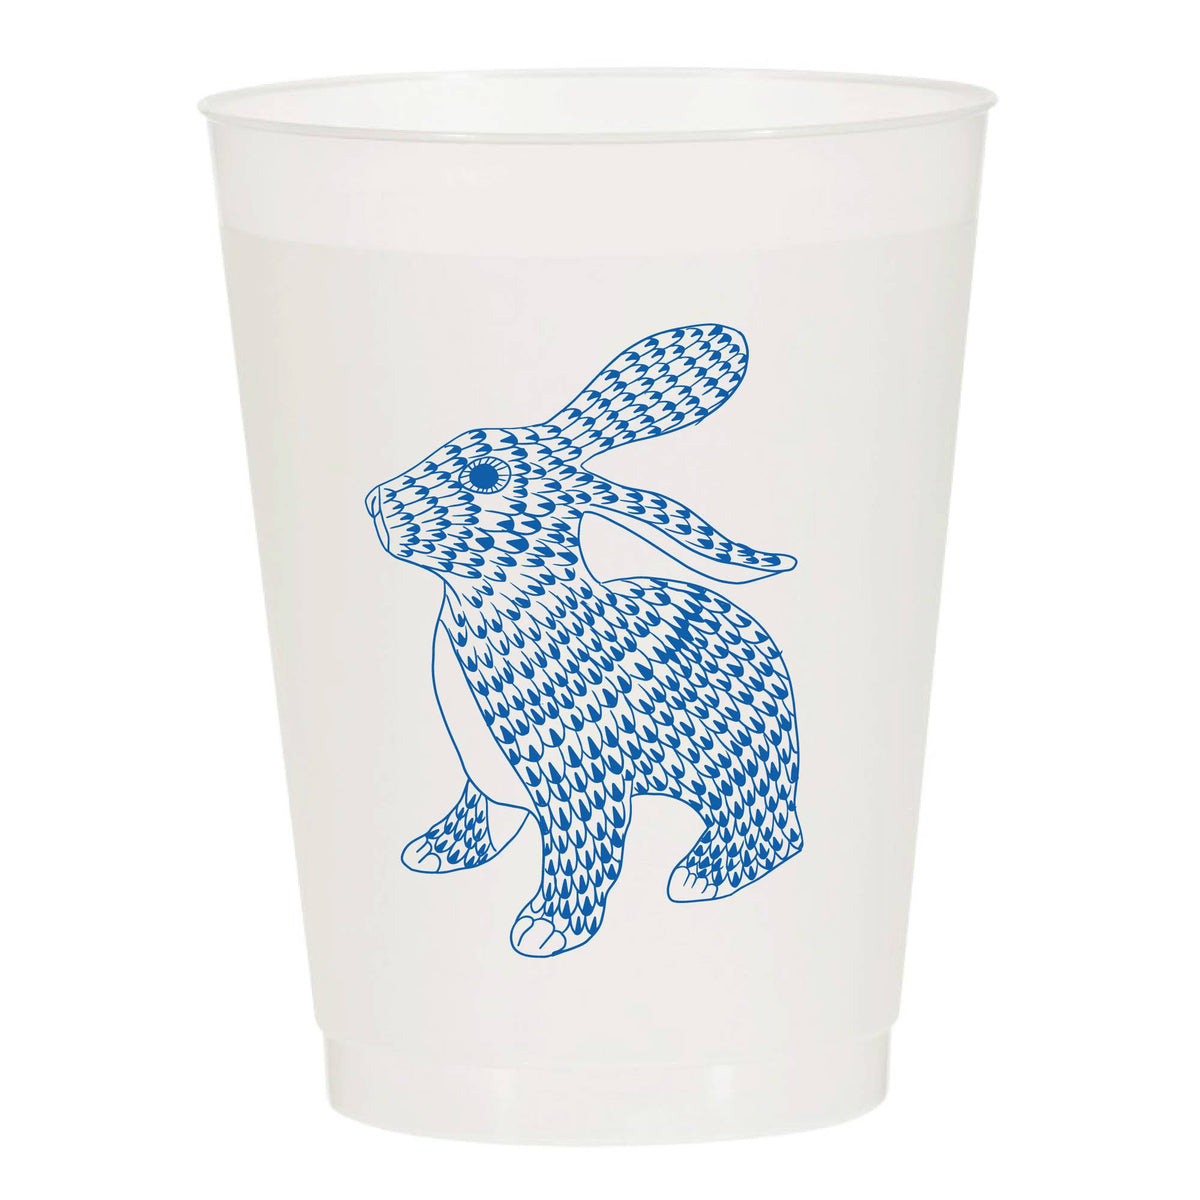 Herend Bunny Reusable Cups - Set of 10 Cups (Blue) - The Preppy Bunny